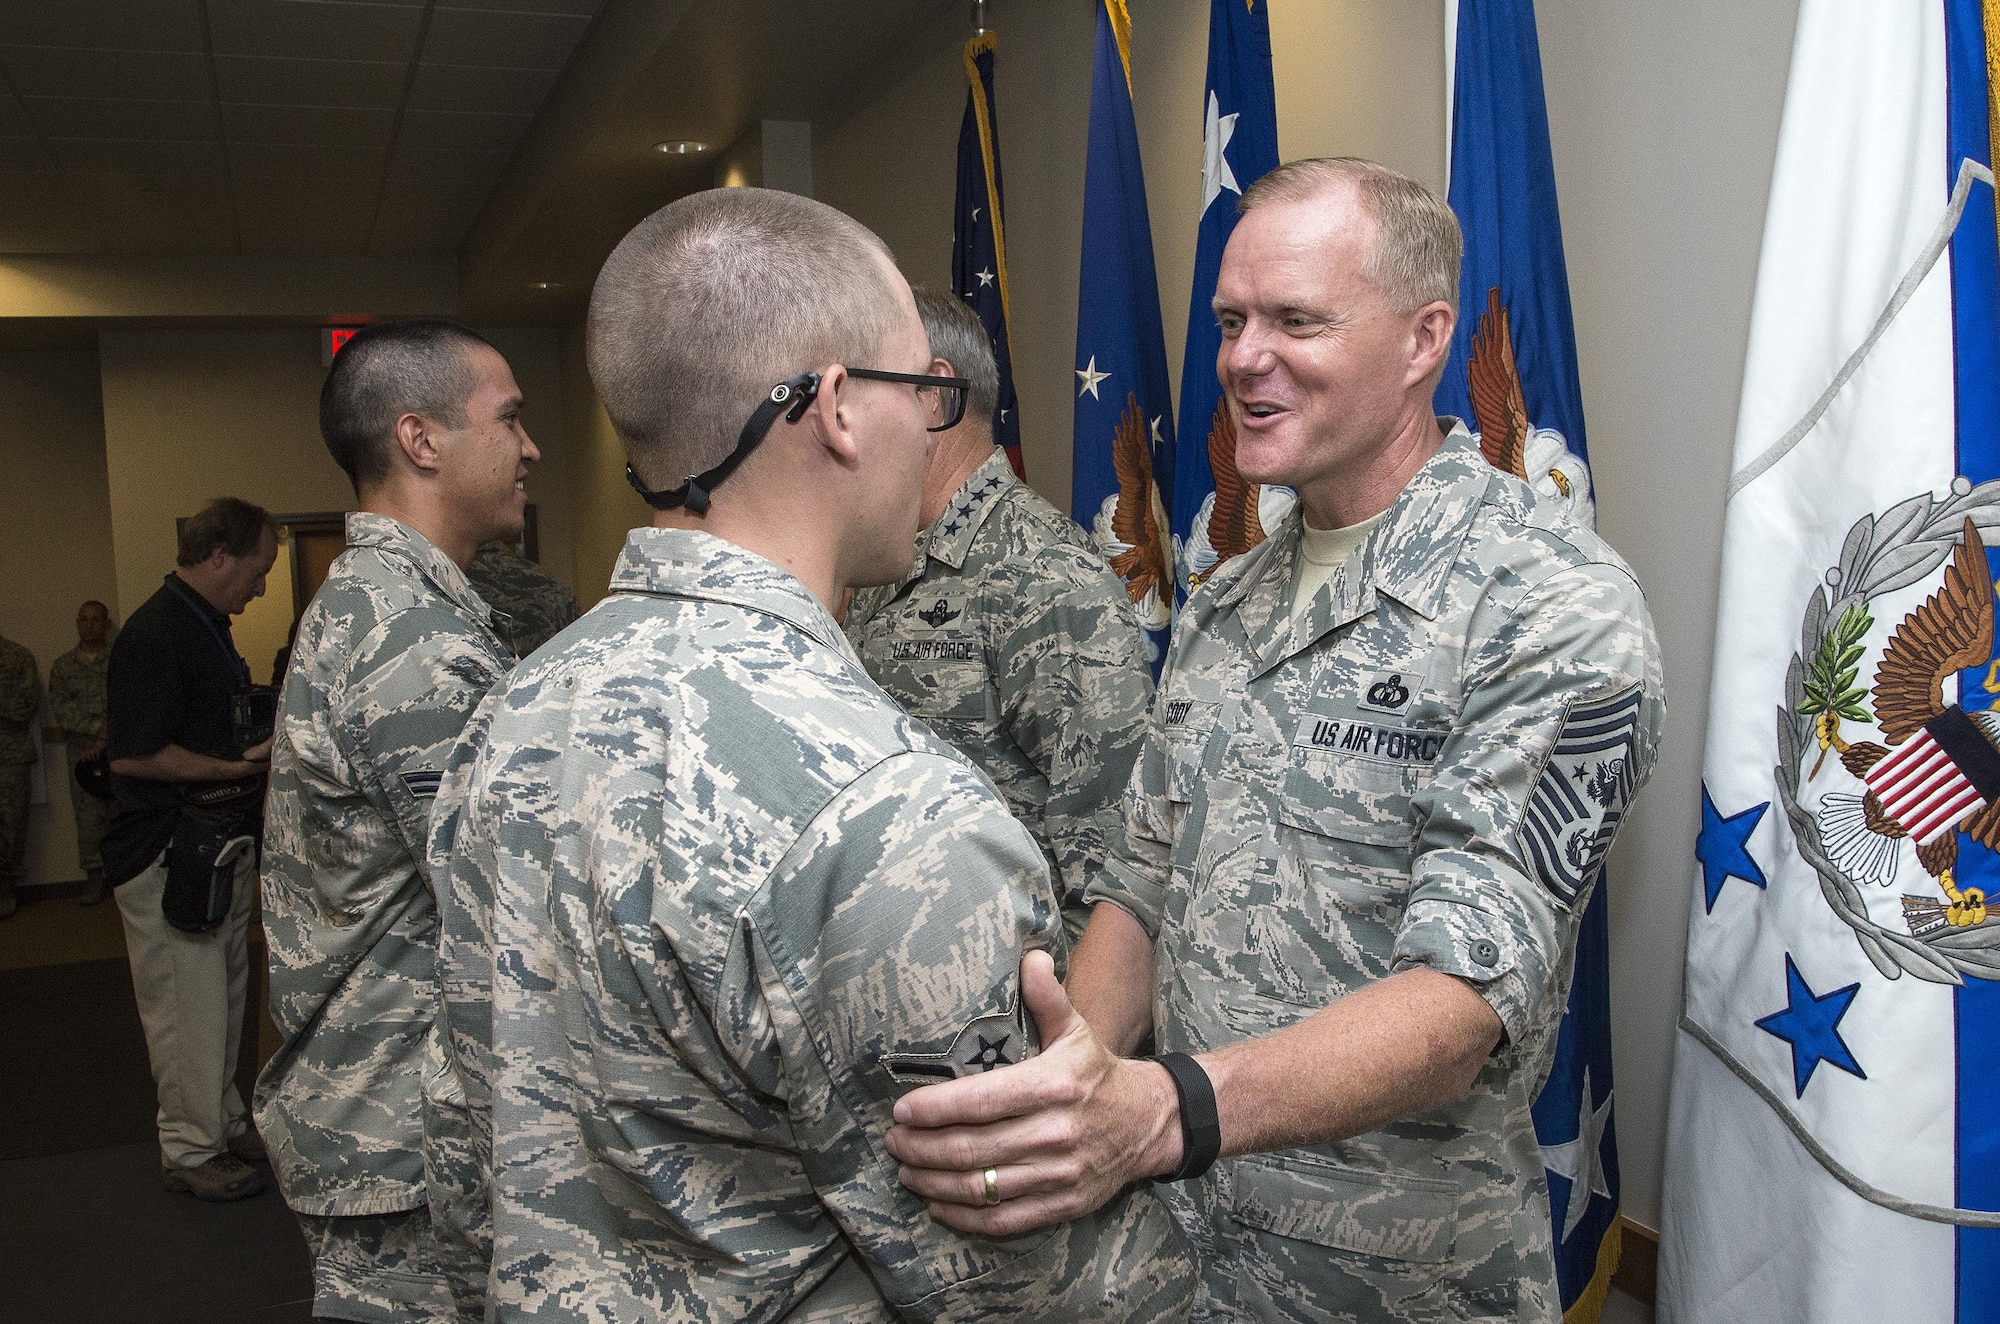 Chief Master Sergeant of the Air Force James A. Cody congratulates an Airman attending Airmen’s Week Aug. 27, 2015, at Joint Base San Antonio-Lackland’s Pfingston Reception Center. The Airmen received a copy of "America's Air Force: A Profession of Arms," the next evolution of the "Little Blue Book" previously released in 1997. The new book gives Airmen instant access to the core values, codes and creeds that guide Airmen as they serve in the Profession of Arms. The book will be distributed to all new Airmen before transitioning to technical training and available online through Air Force e-publishing. (U.S. Air Force photo by Johnny Saldivar/Released)  